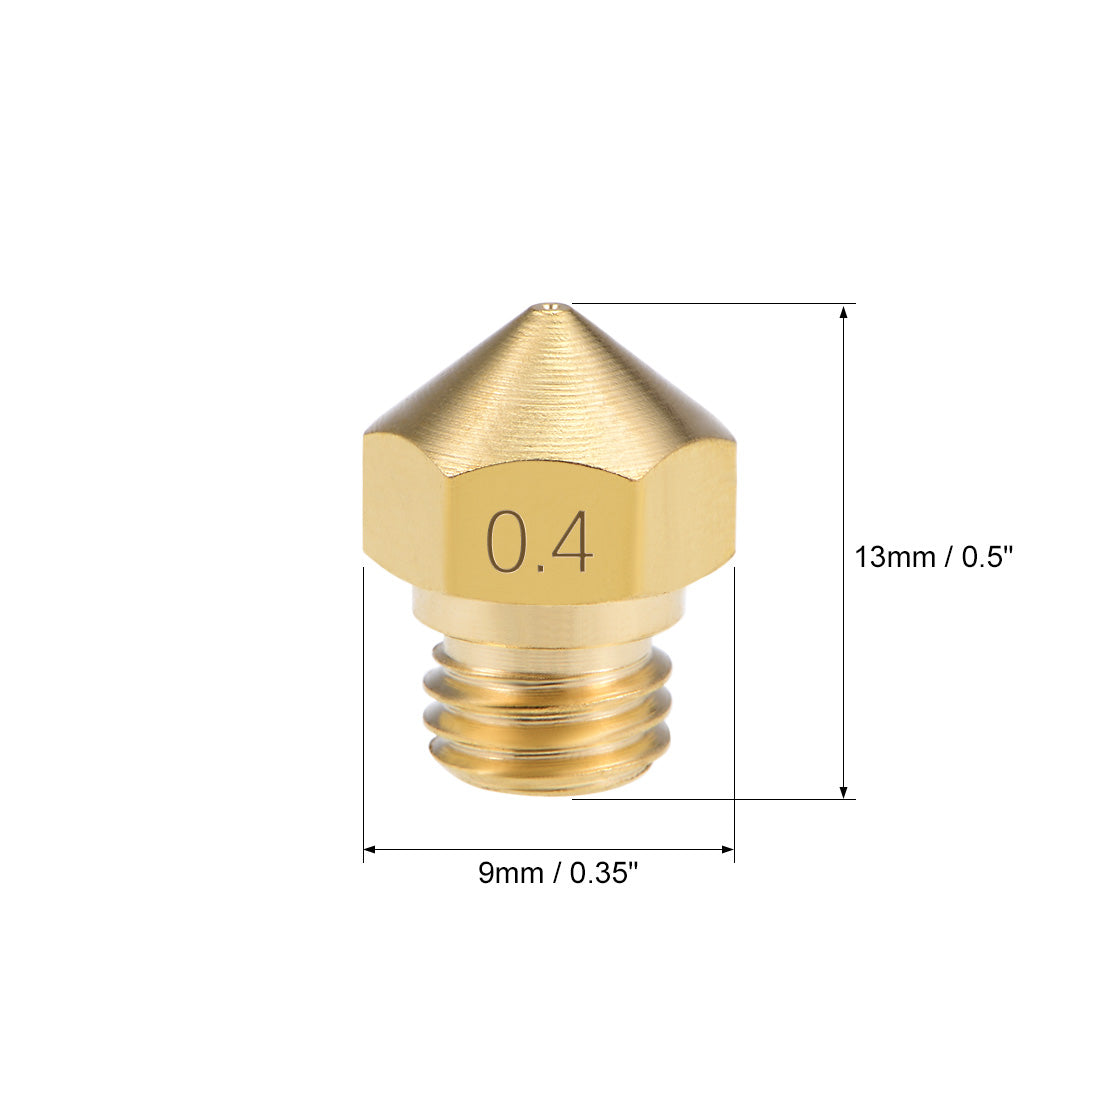 uxcell Uxcell 0.4mm 3D Printer Nozzle Head M7 Thread Replacement for MK10 1.75mm Extruder Print, Brass 5pcs